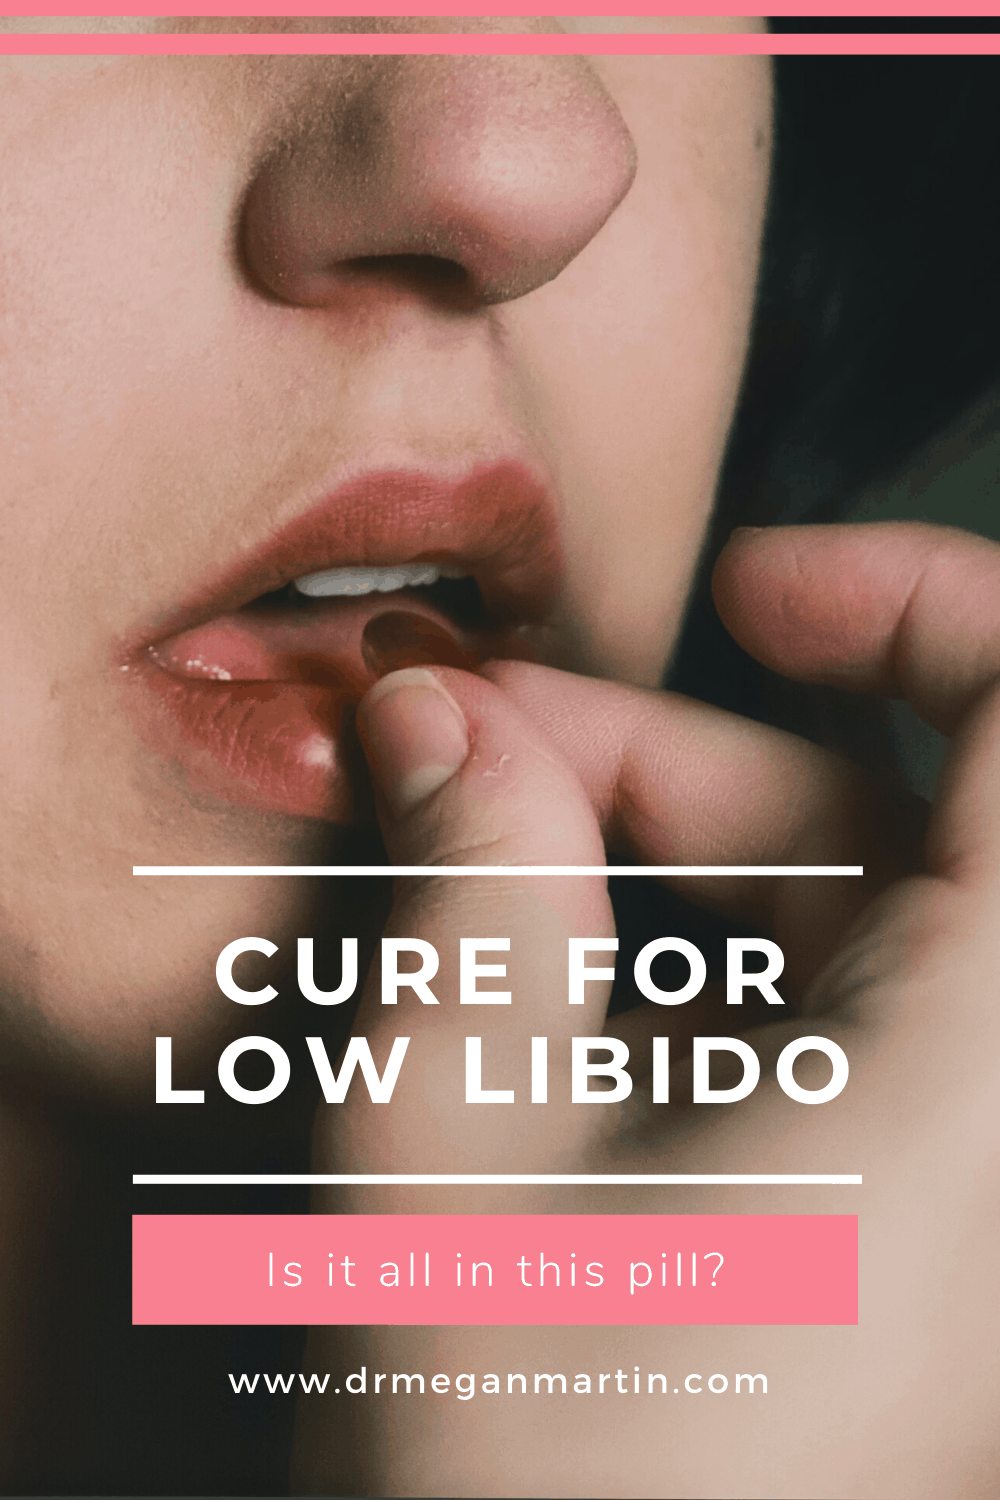 A pill to cure your low libido?